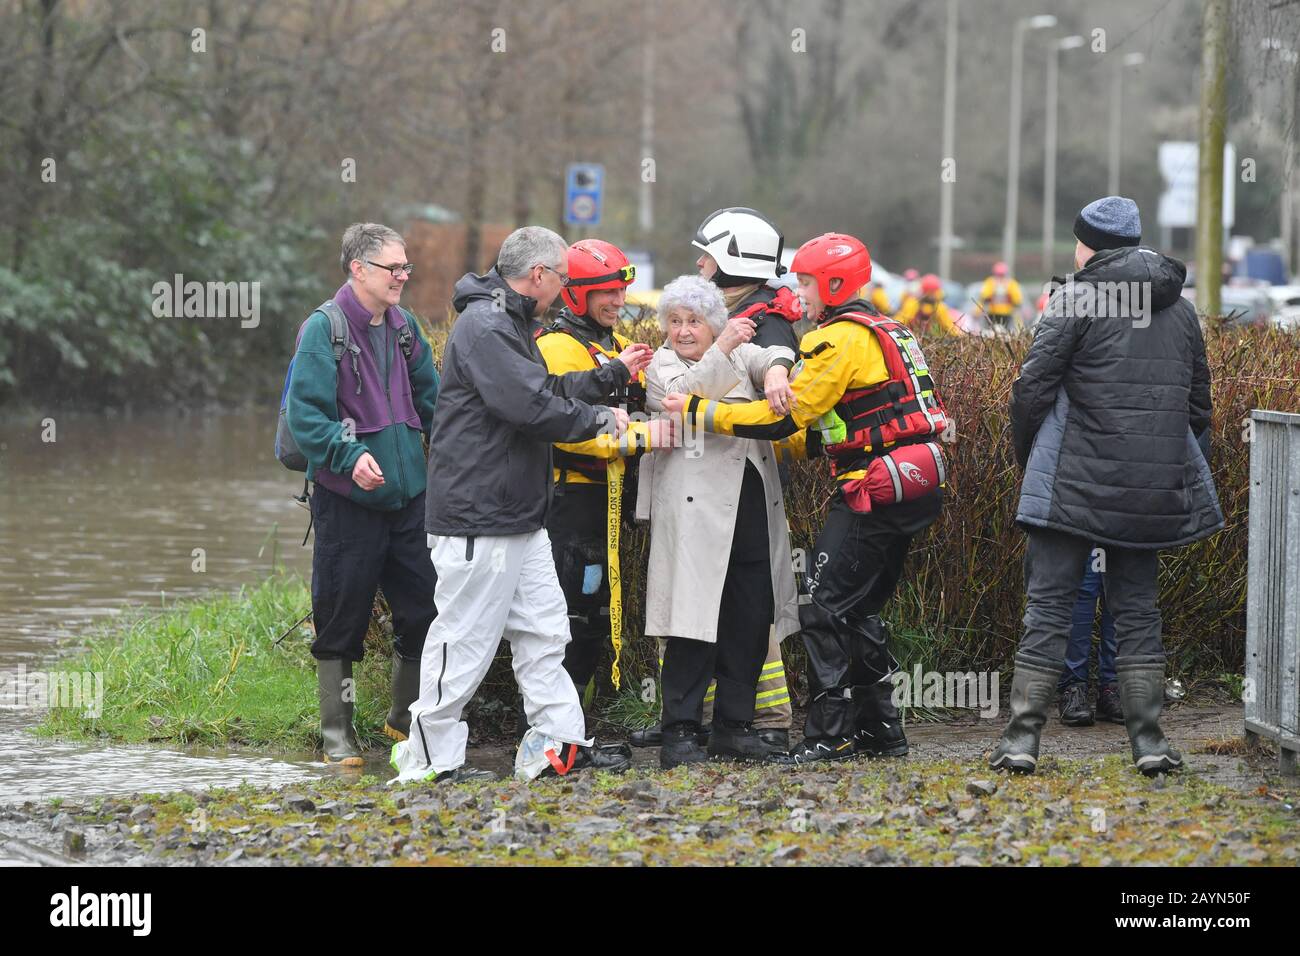 Rescue operations continue as emergency services take residents of Oxford Street, Nantgarw to safety, after flooding in Wales as Storm Dennis hit the UK. Stock Photo